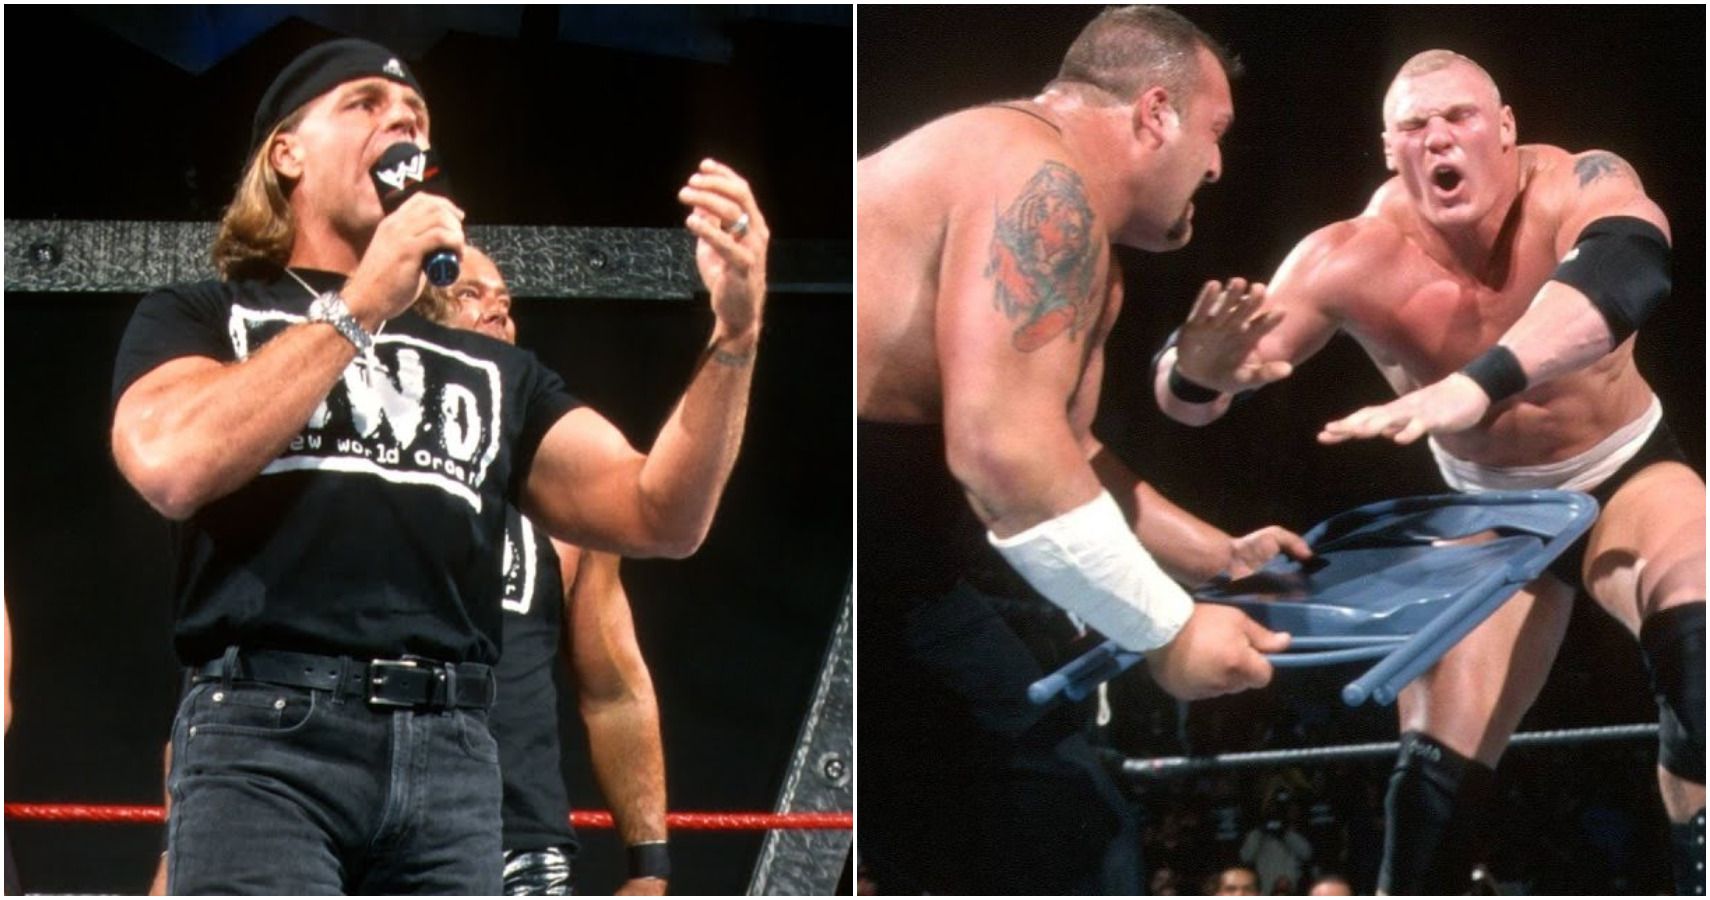 10 Things About WWE In 2002 That Make No Sense